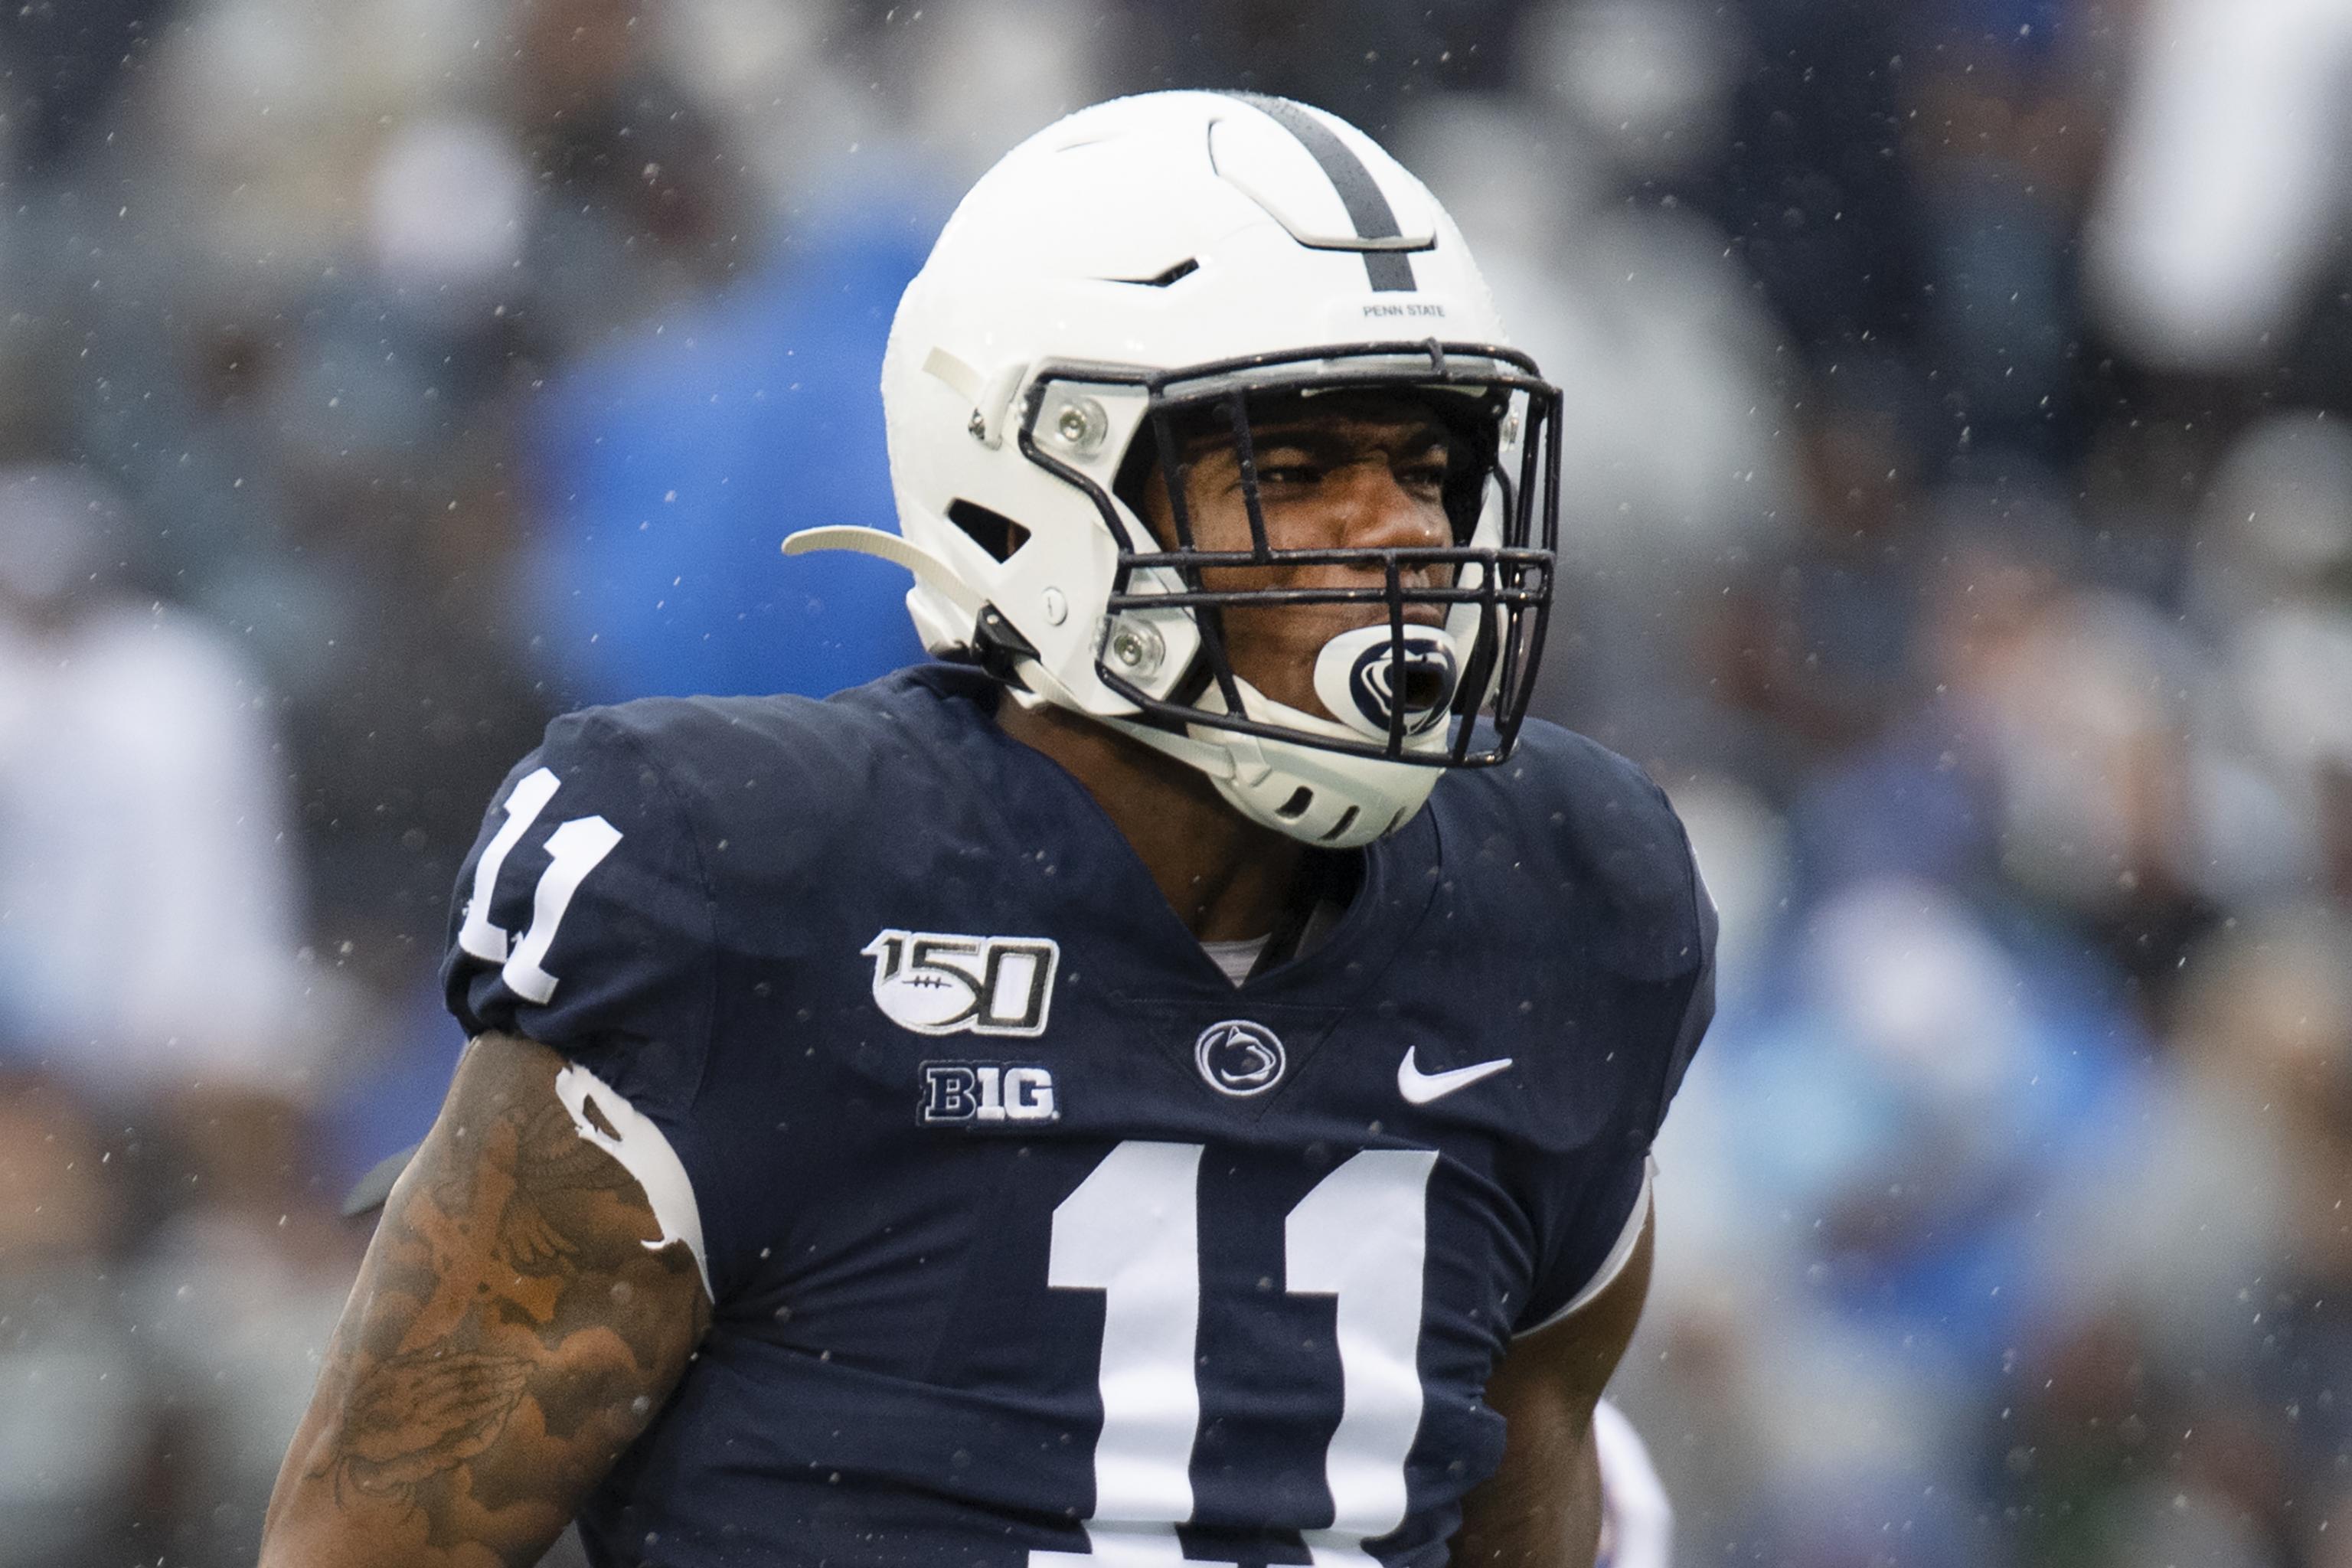 Micah Parsons 2021 NFL Draft Scouting Report